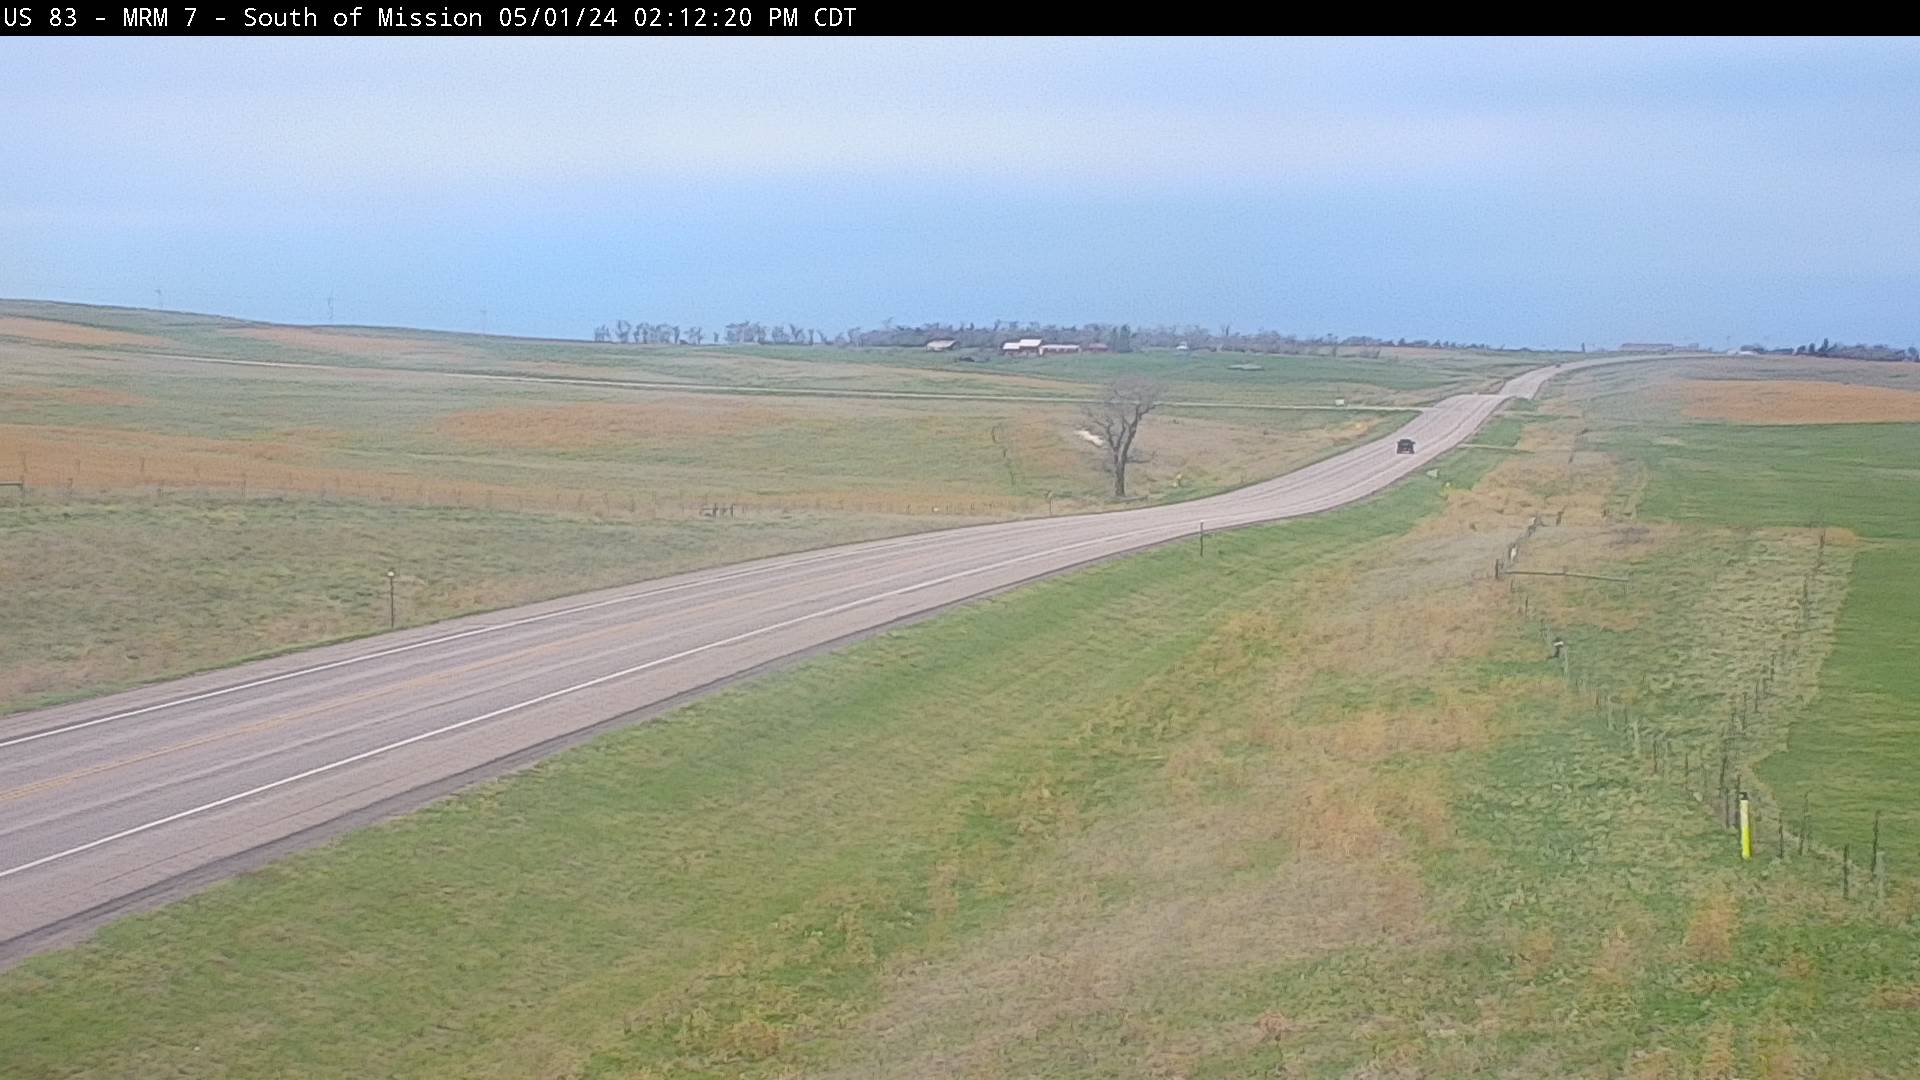 Traffic Cam South of town along US-83 - North Player